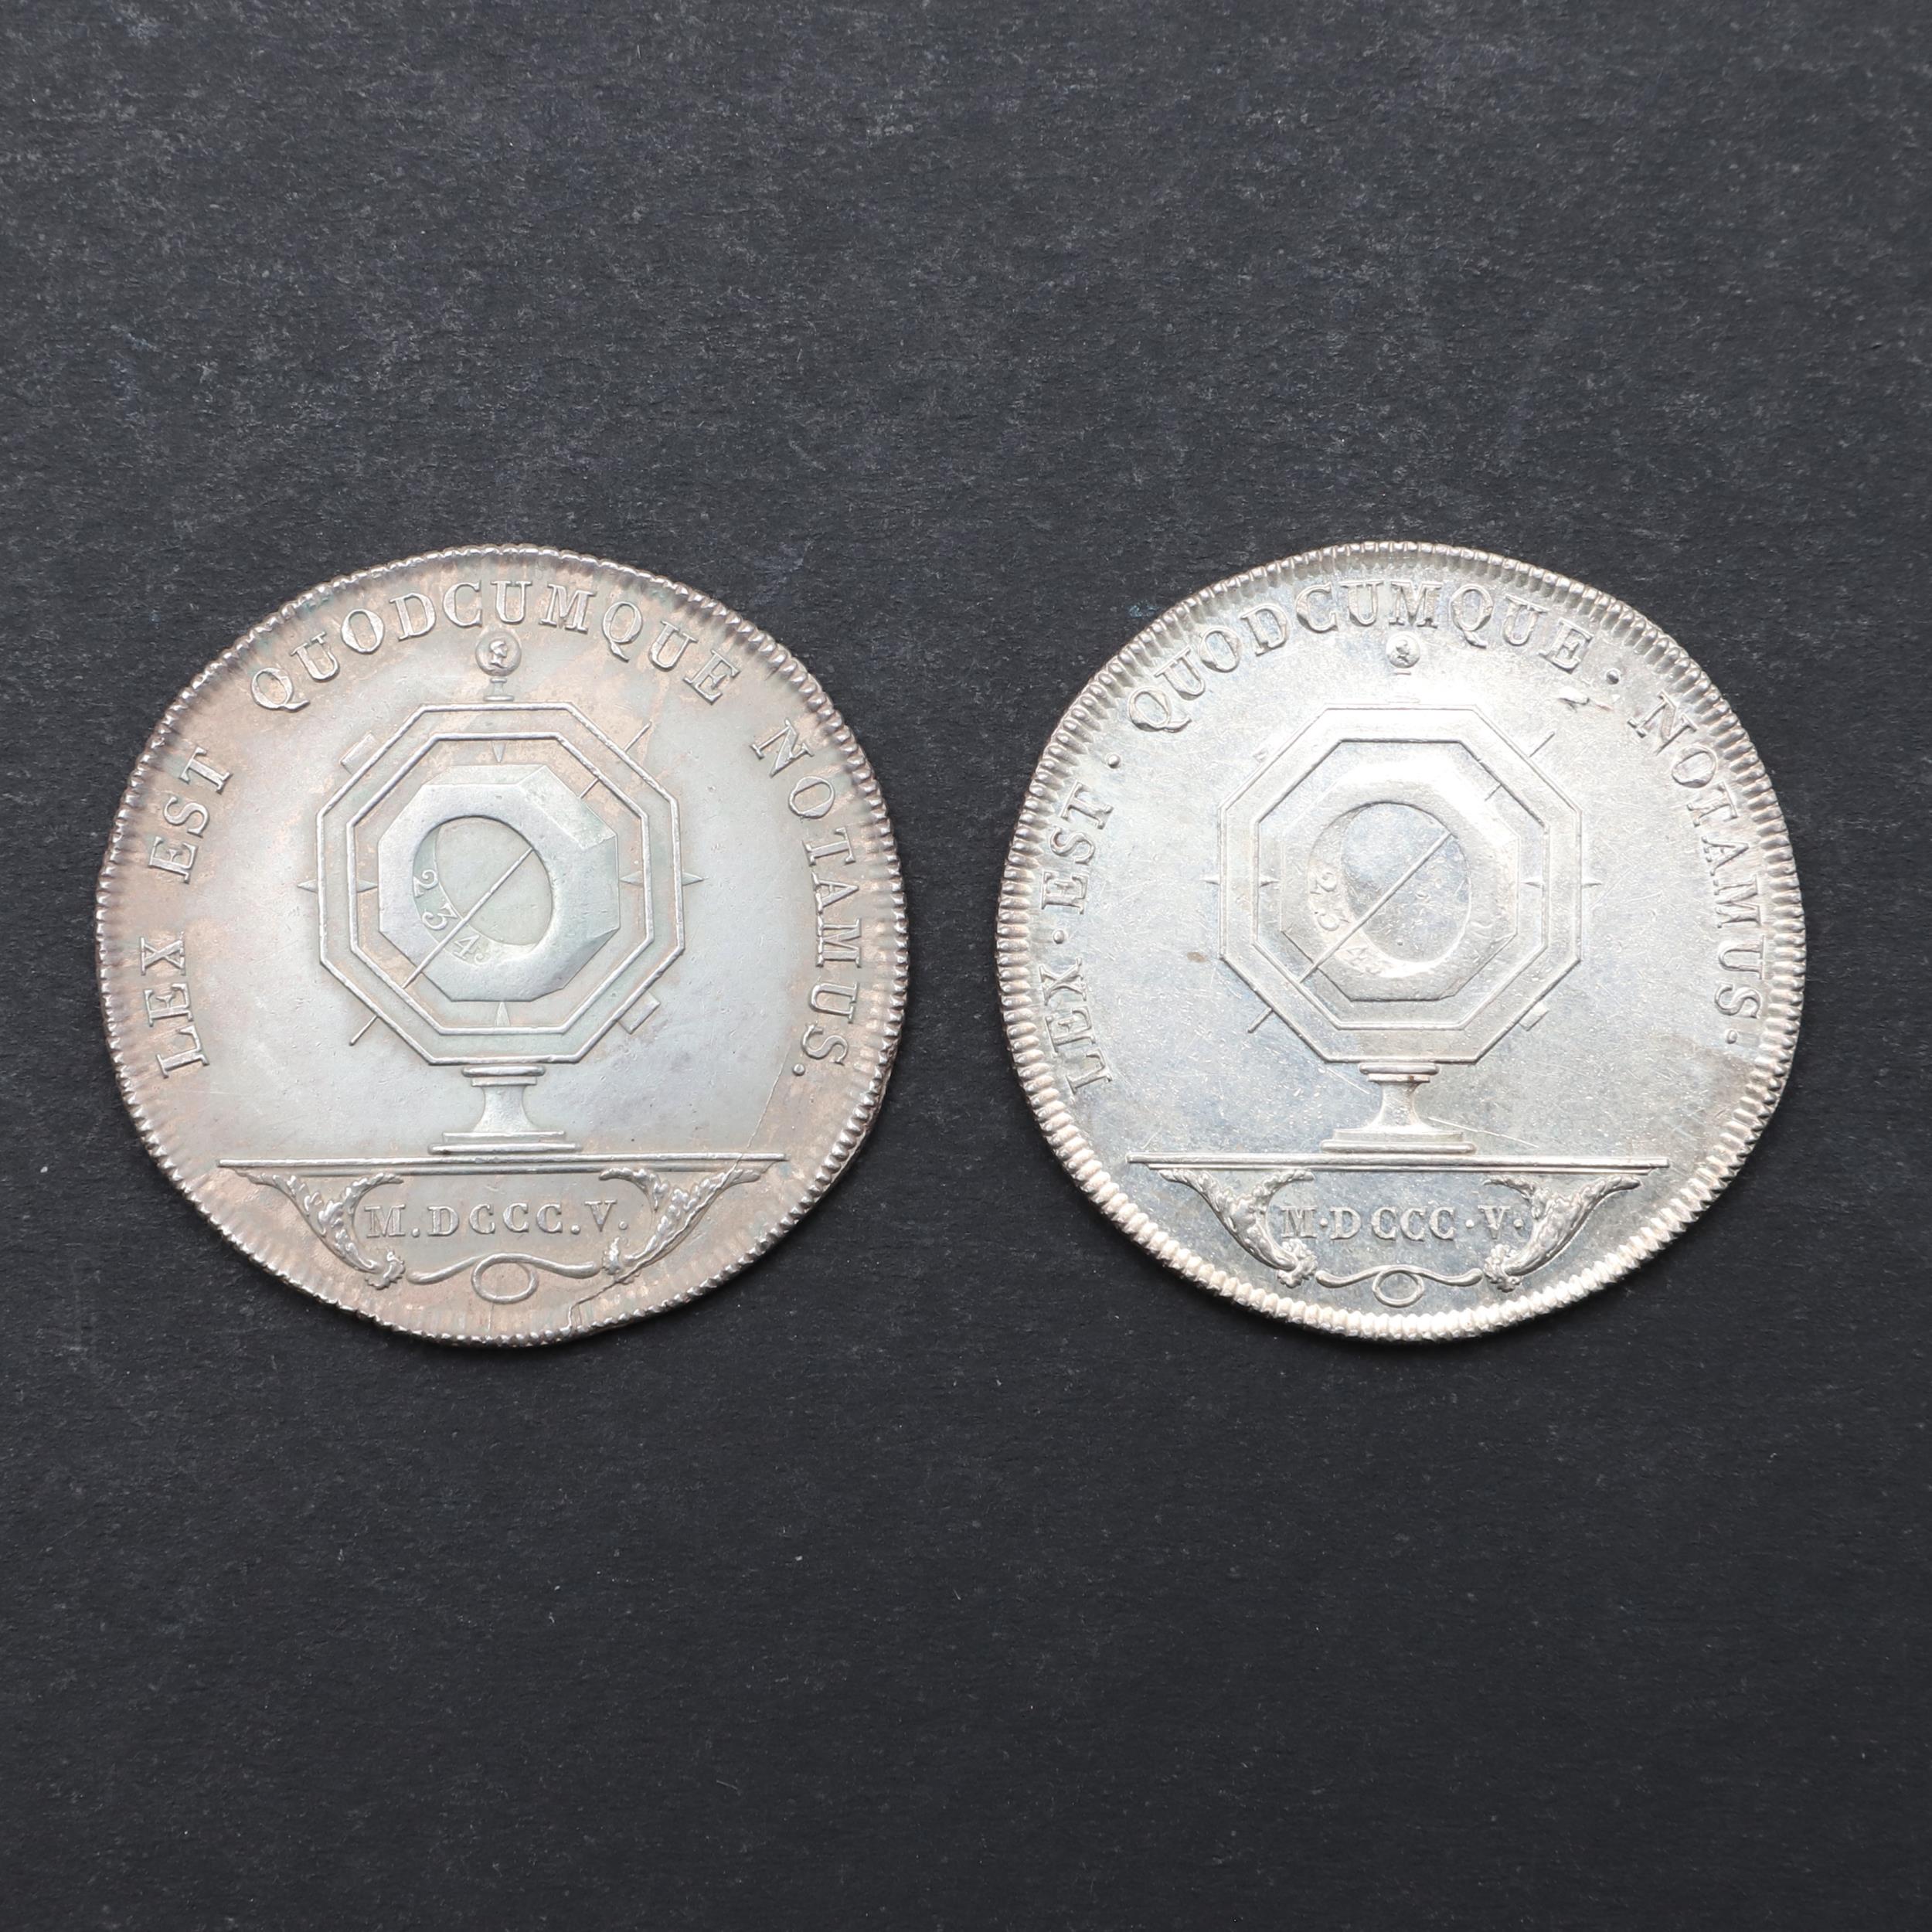 TWO EARLY 19TH CENTURY FRENCH NOTARY TOKENS FROM LYON. - Image 2 of 3